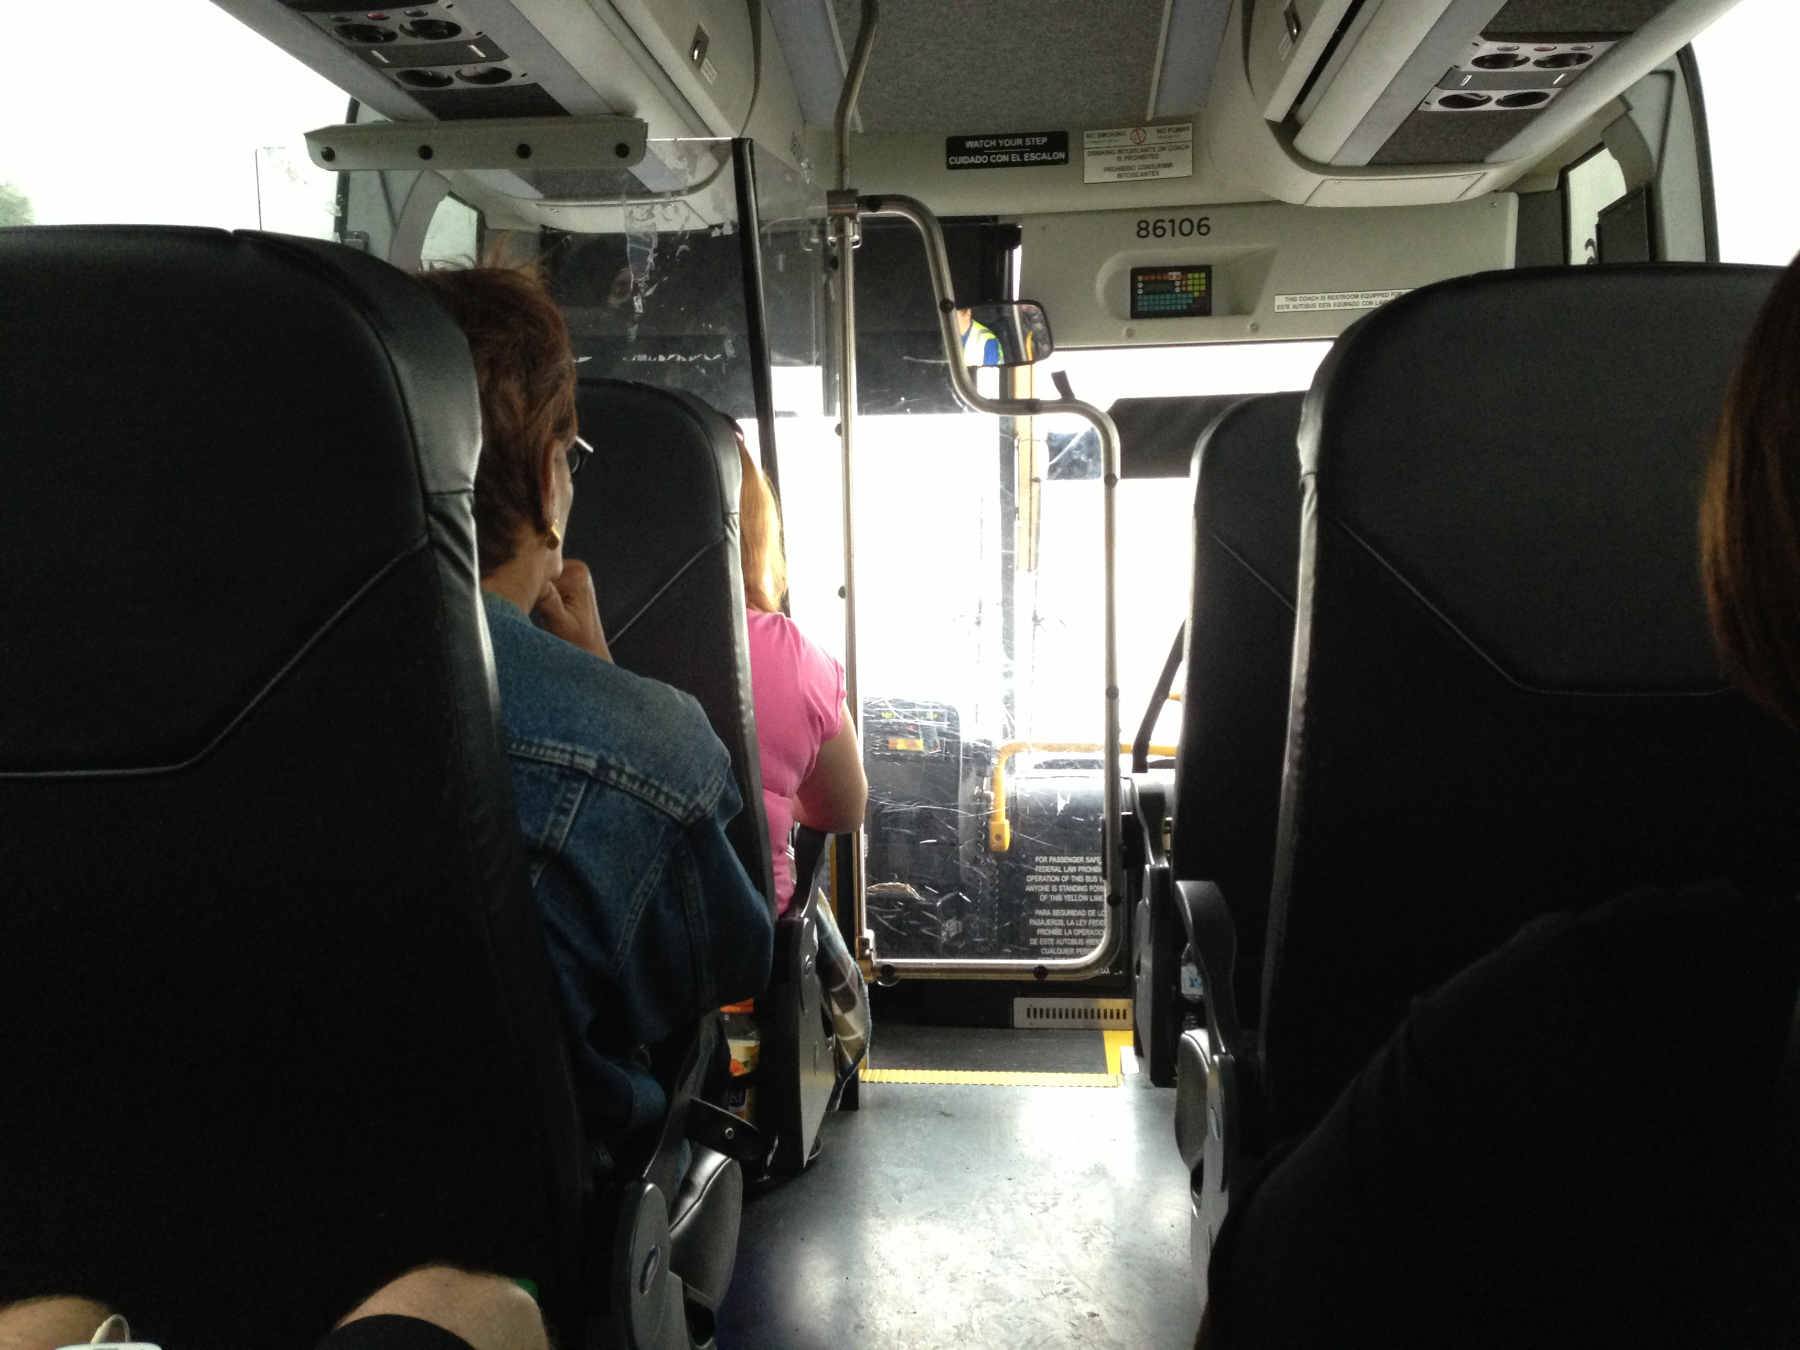 Onboard the Greyhound bus